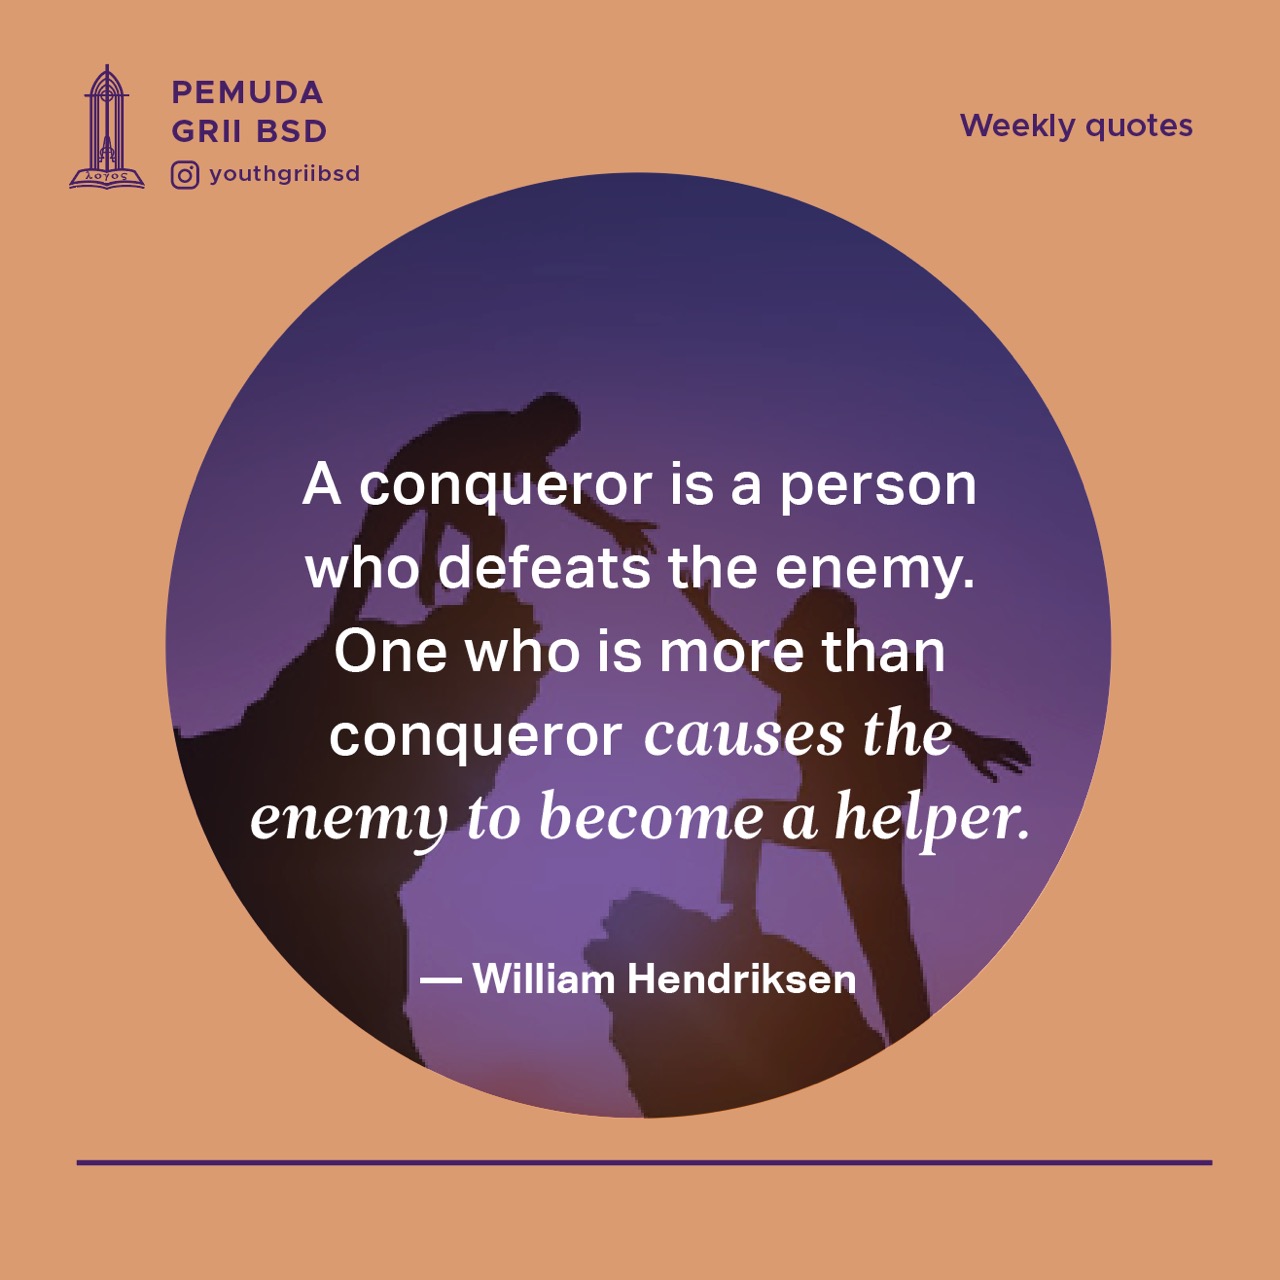 A conqueror is a person who defeats the enemy. One who is more than conqueror causes the enemy to become a helper.